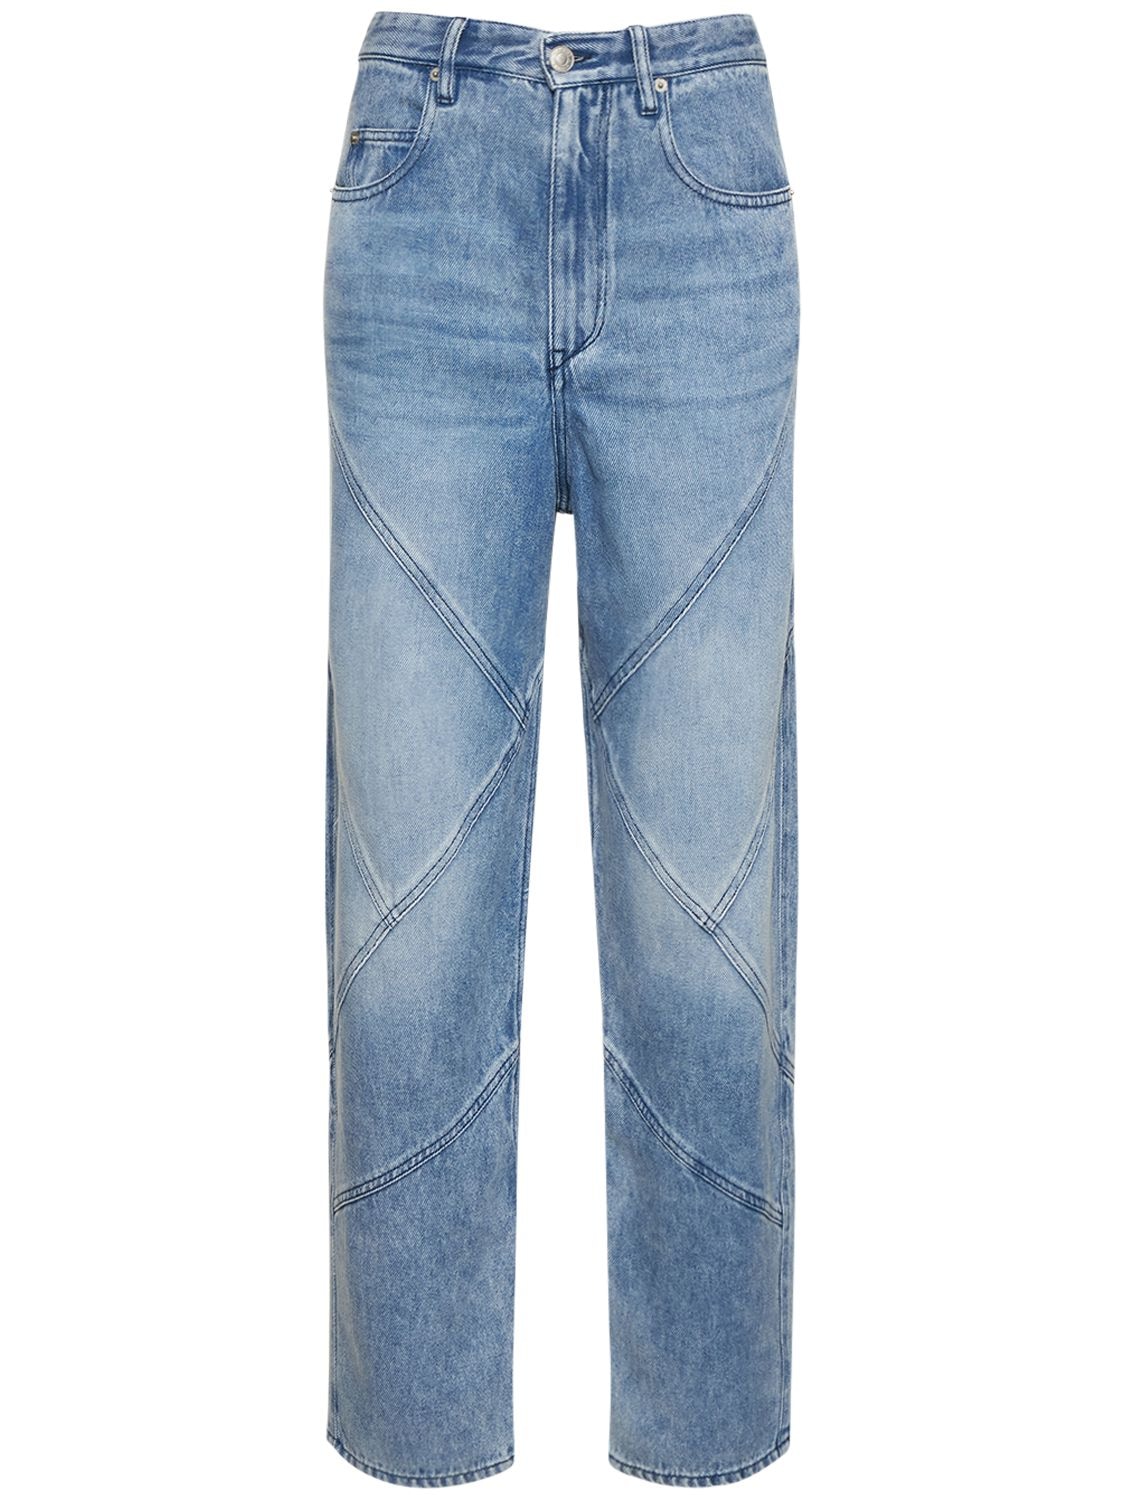 Image of Corsy Lyocell Denim Jeans